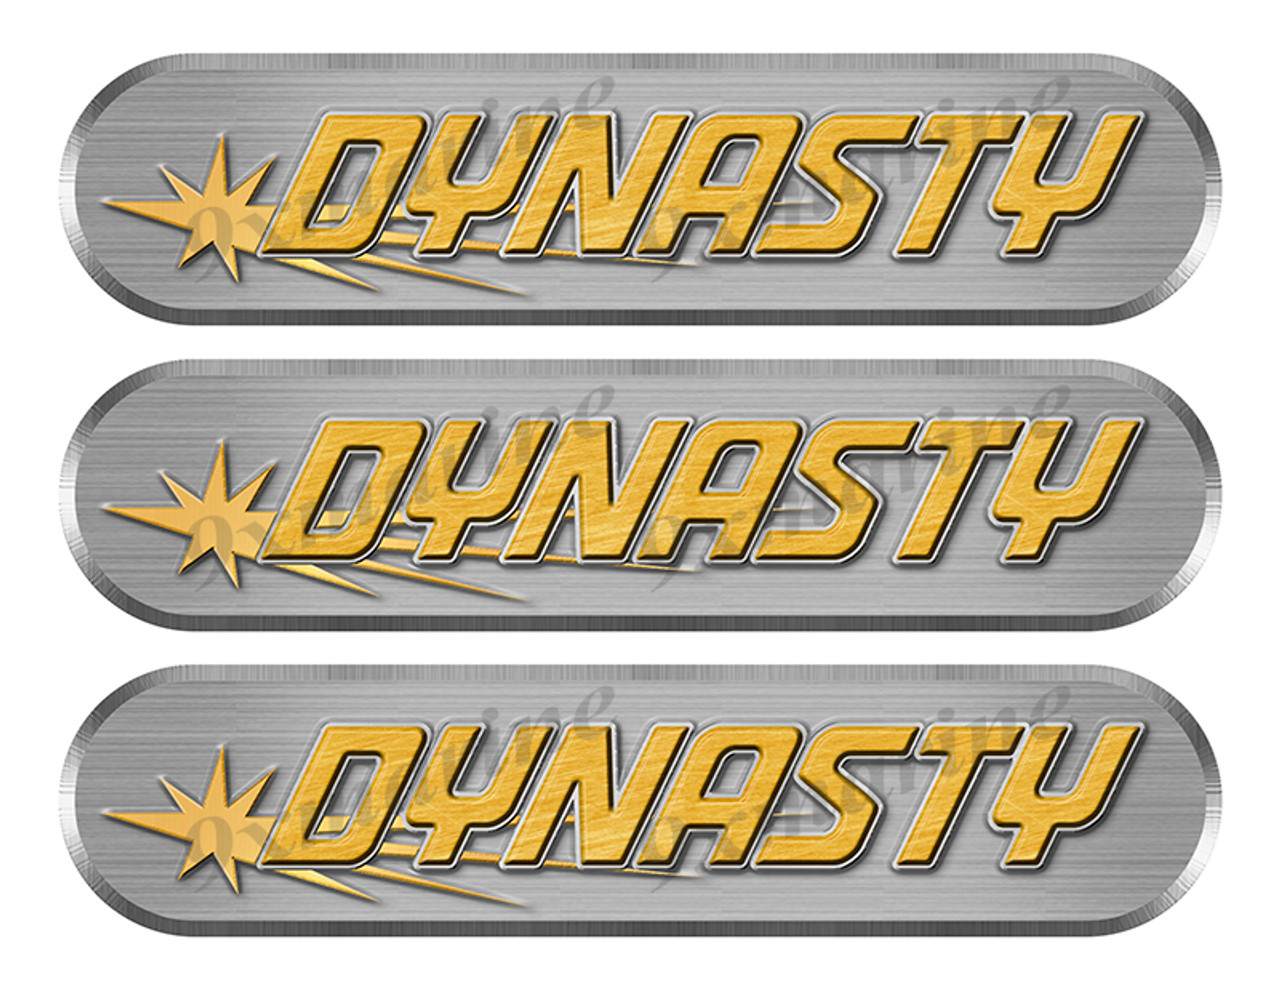 3 Dynasty Remastered Stickers. Brushed Metal Style - 10" long